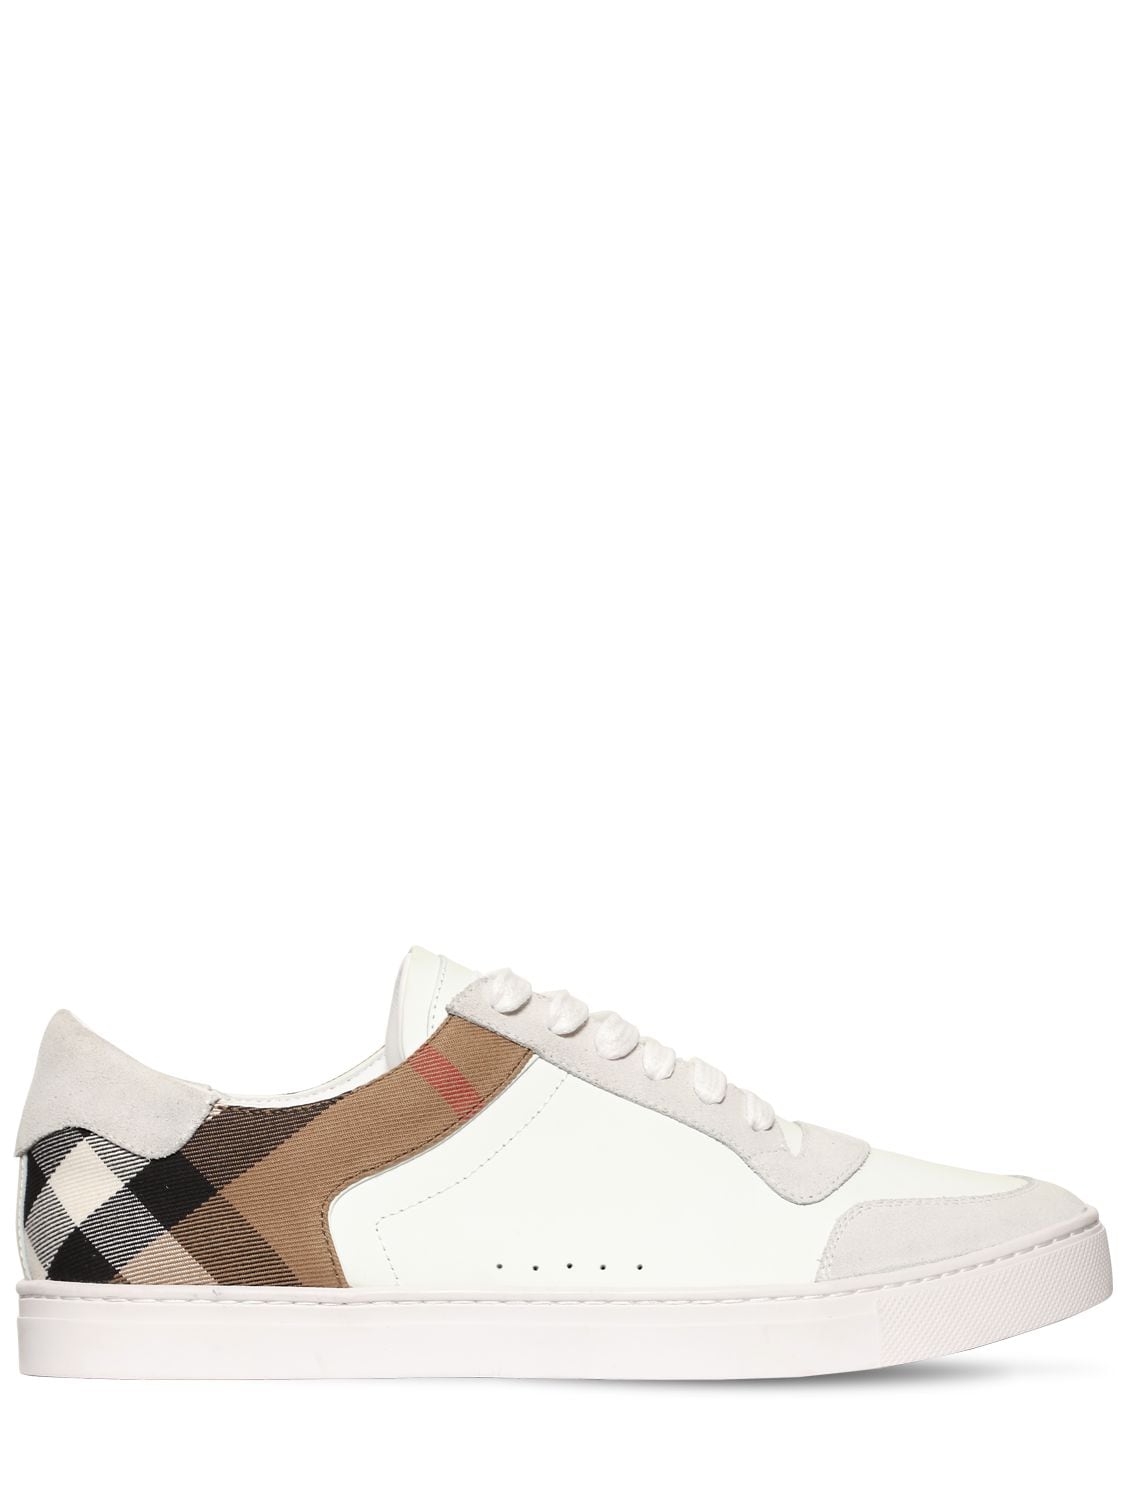 New Reeth Check Canvas & Leather Sneaker